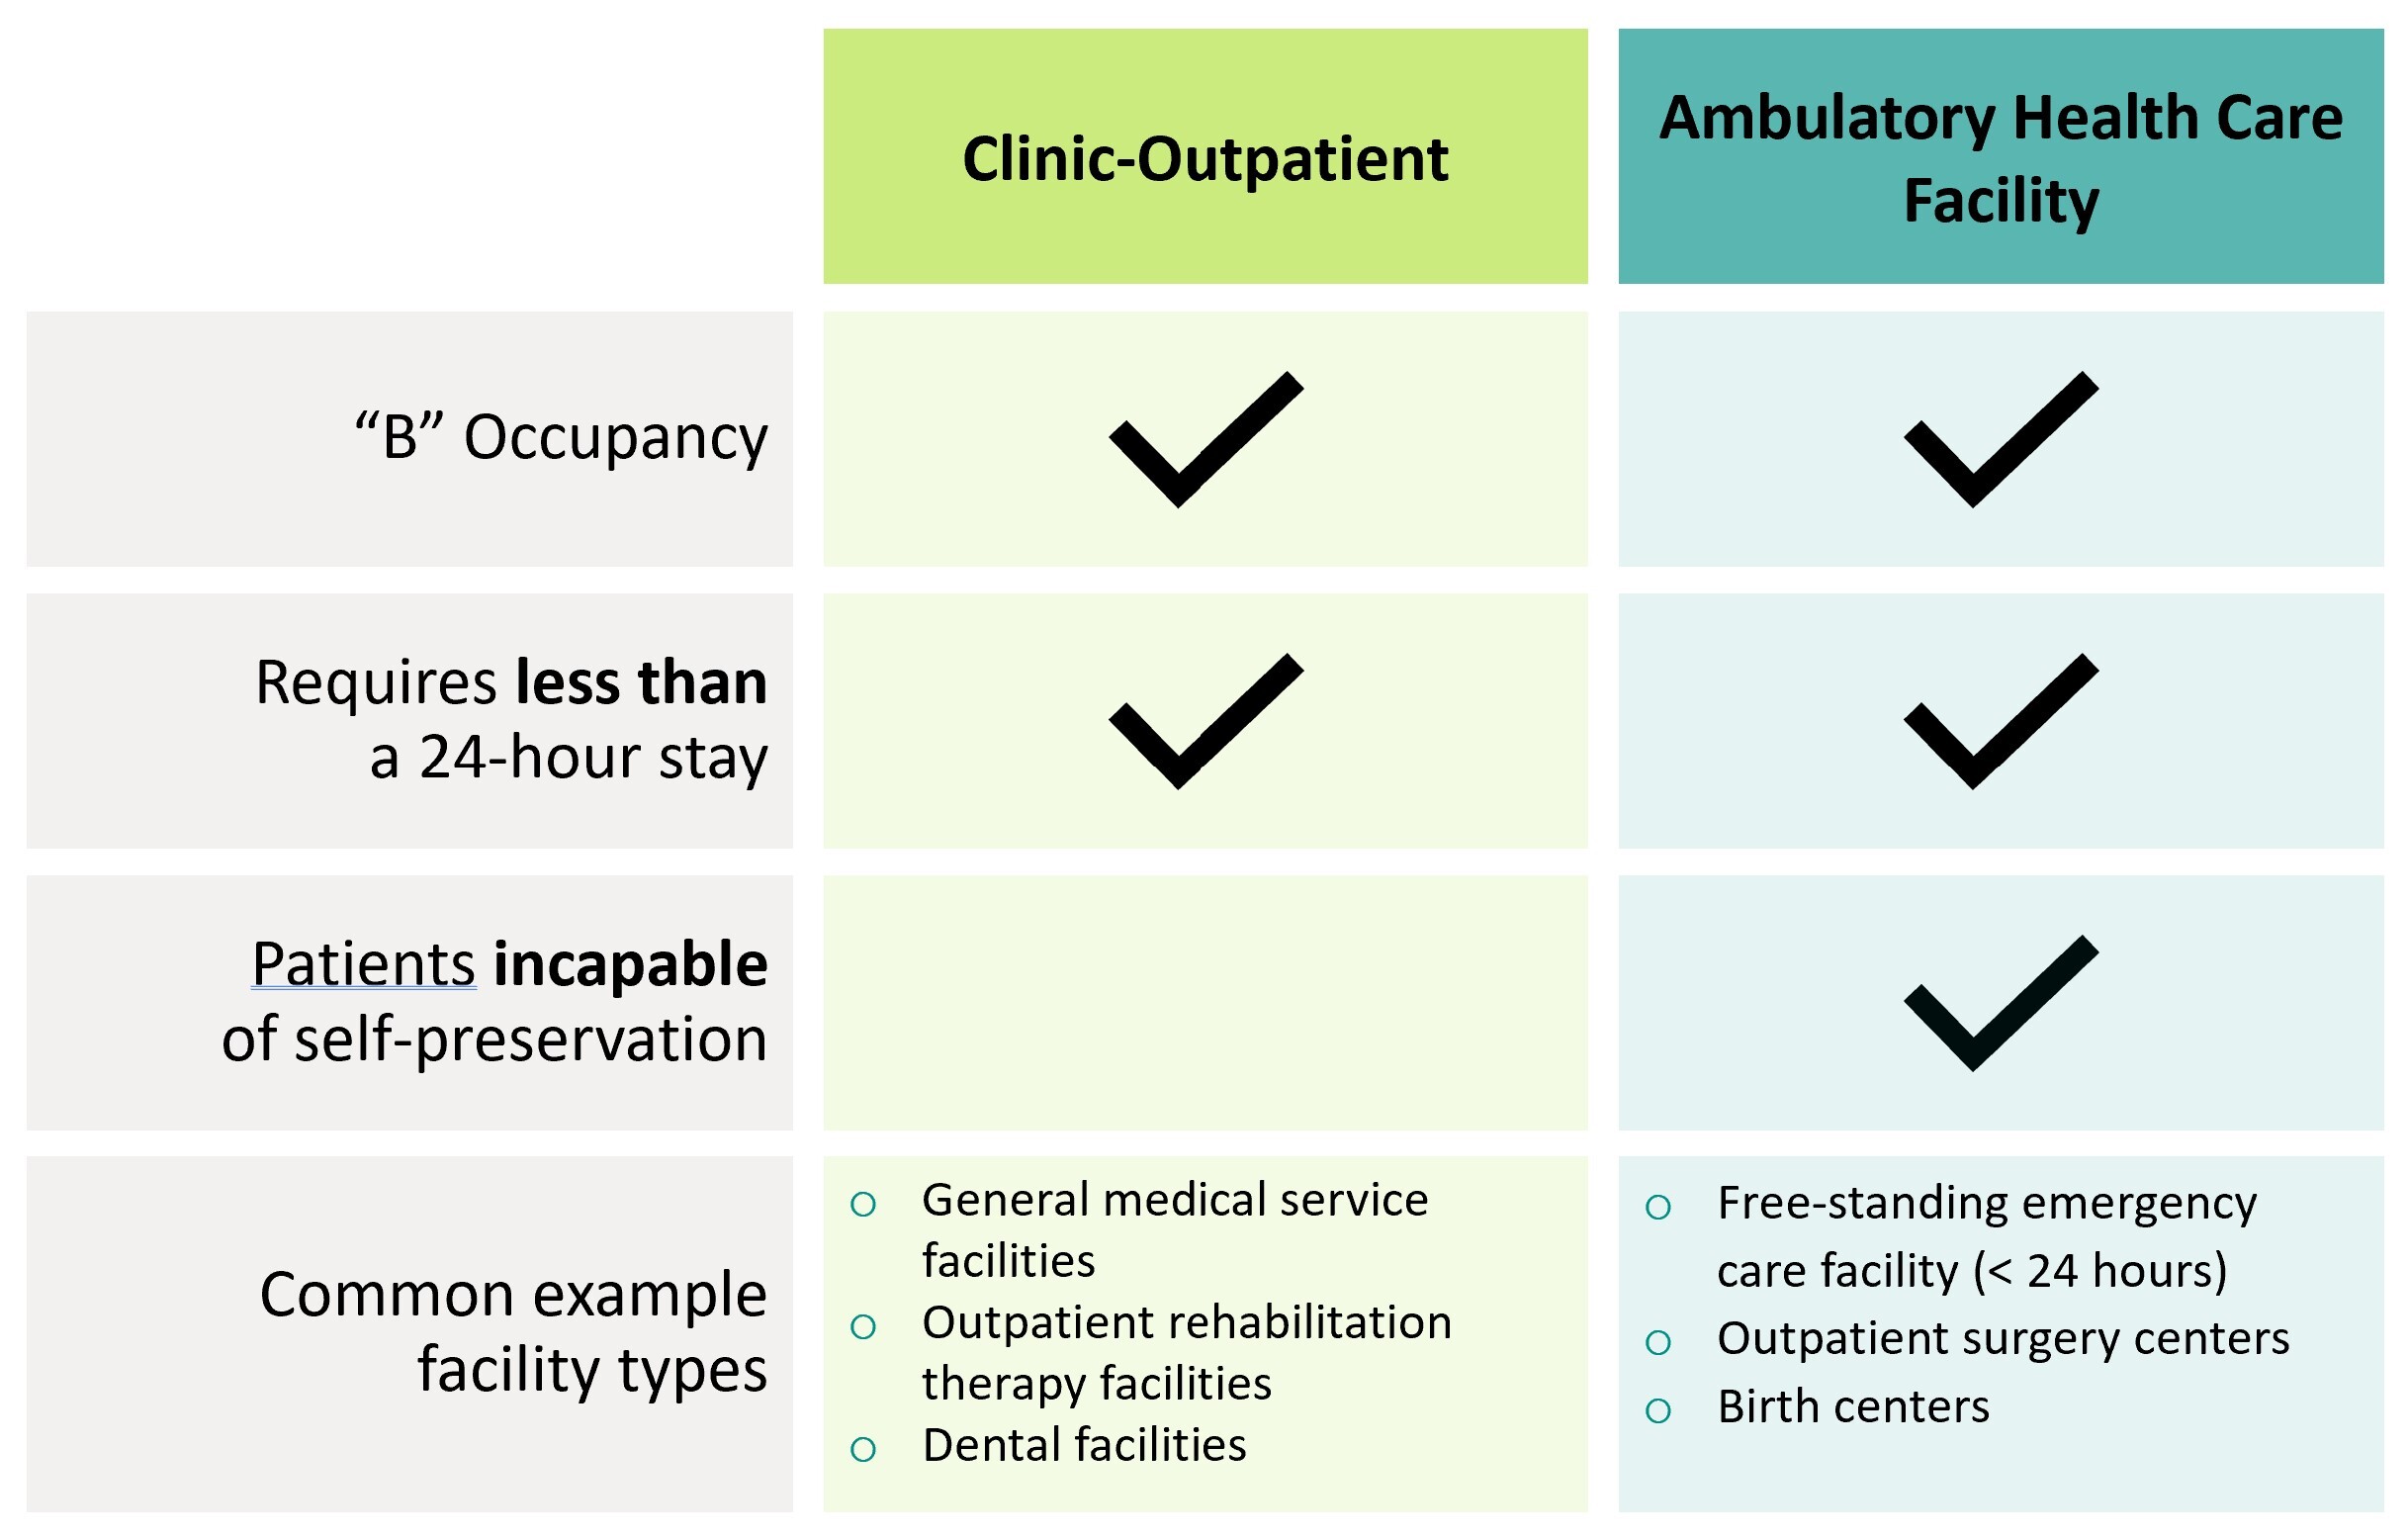 Clinic-Outpatient vs. Ambulatory Health Care Facility